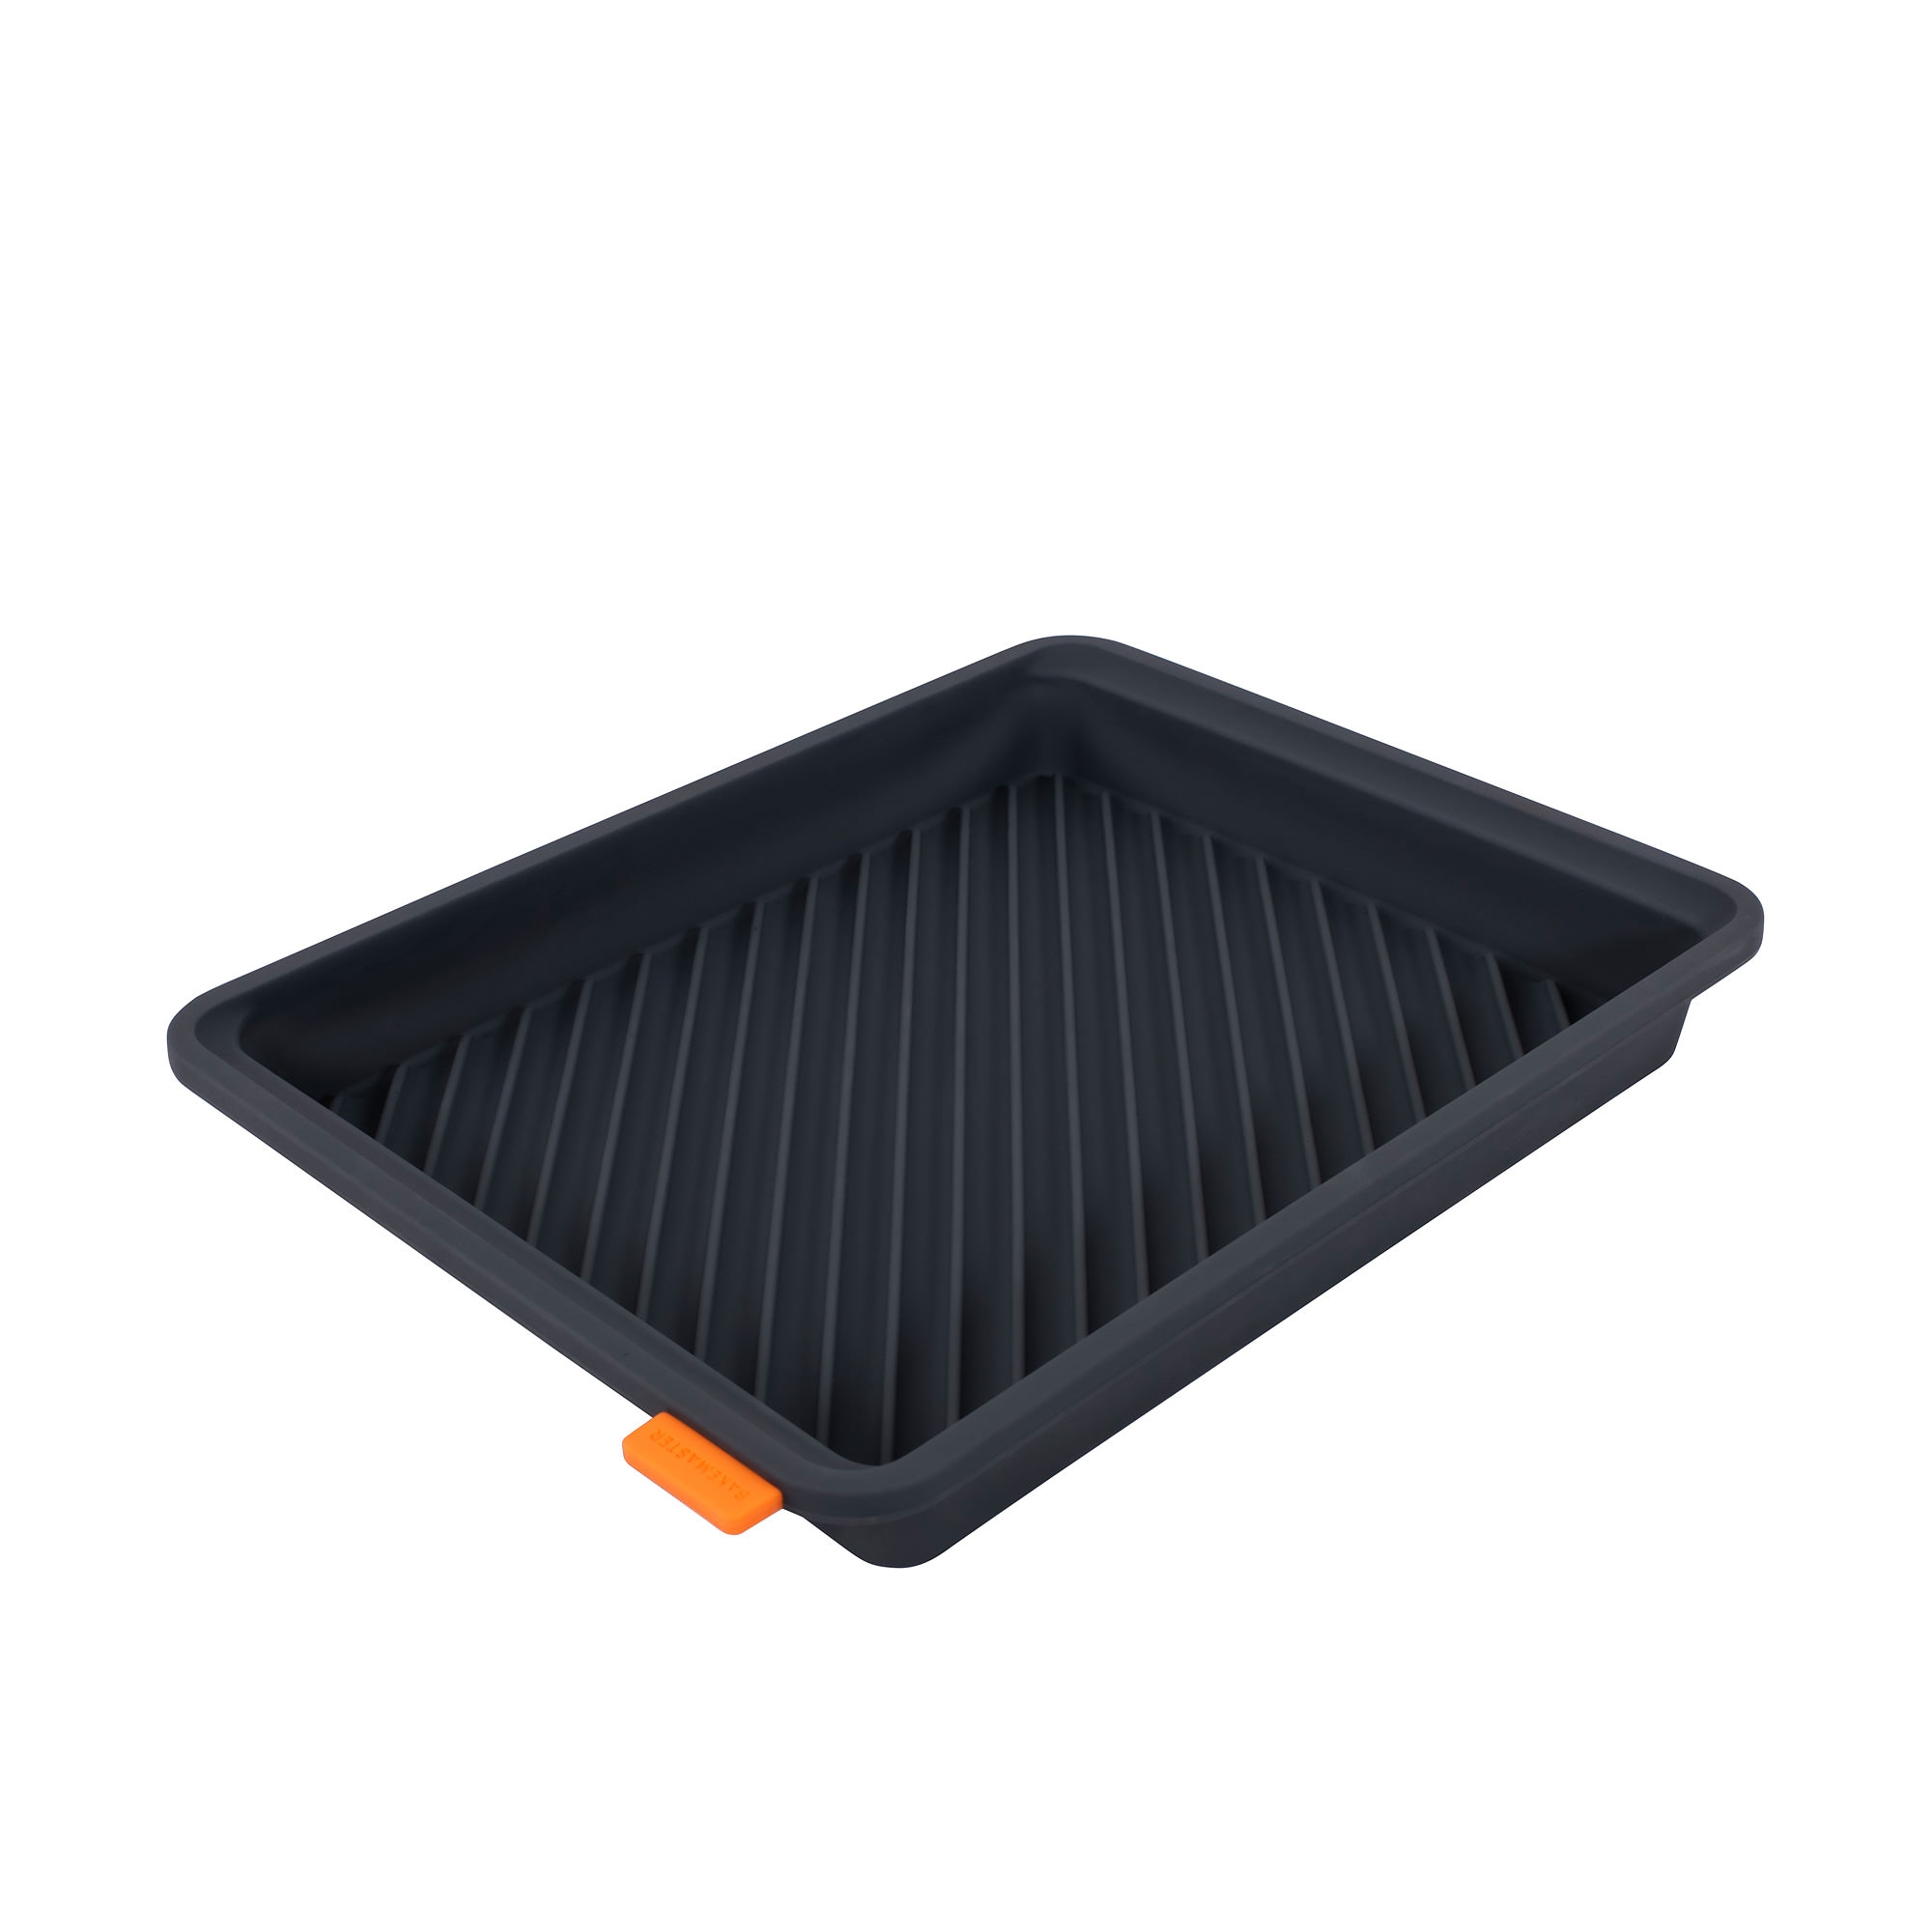 Bakemaster Reinforced Silicone Grill Divider Tray 28x22cm Image 1